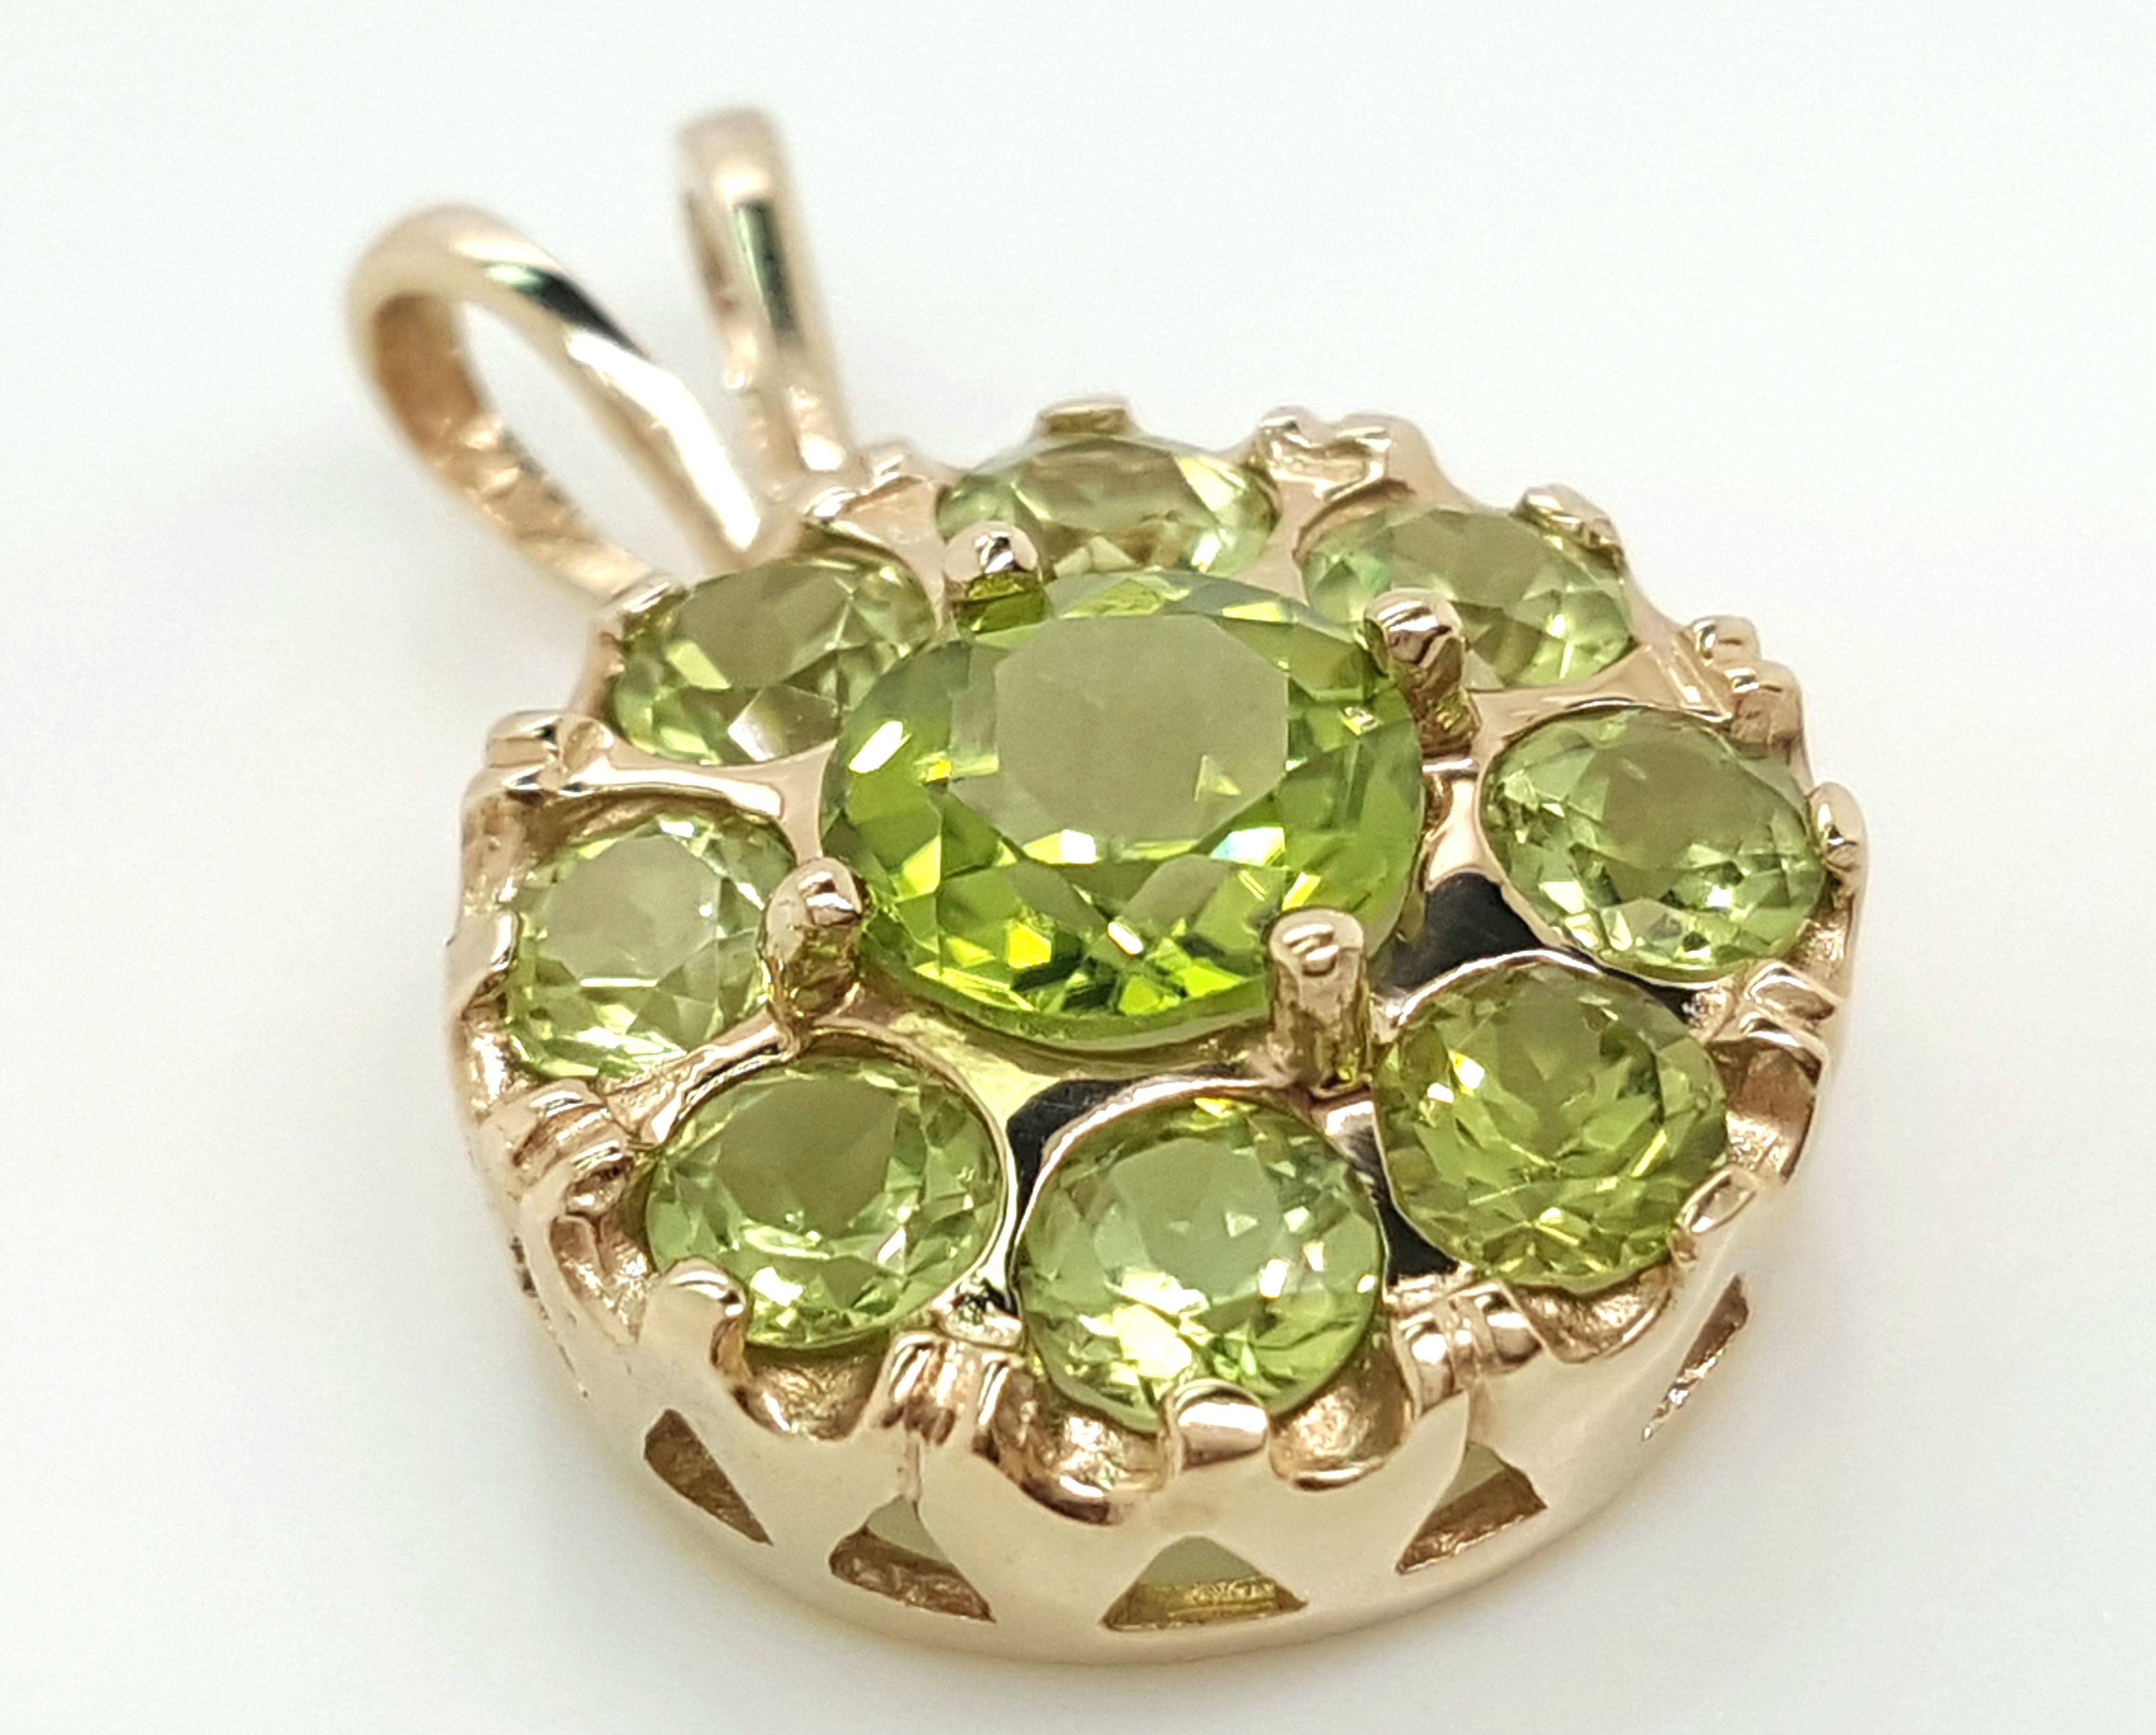 14 Karat Yellow Gold Victoria Style Peridot Pendant   The feminine pendant style dates back to the 1840's and features a round peridot set in four prongs and elegantly surrounded by a halo of round peridots, accented by a rabbit ear bail.  Weighing